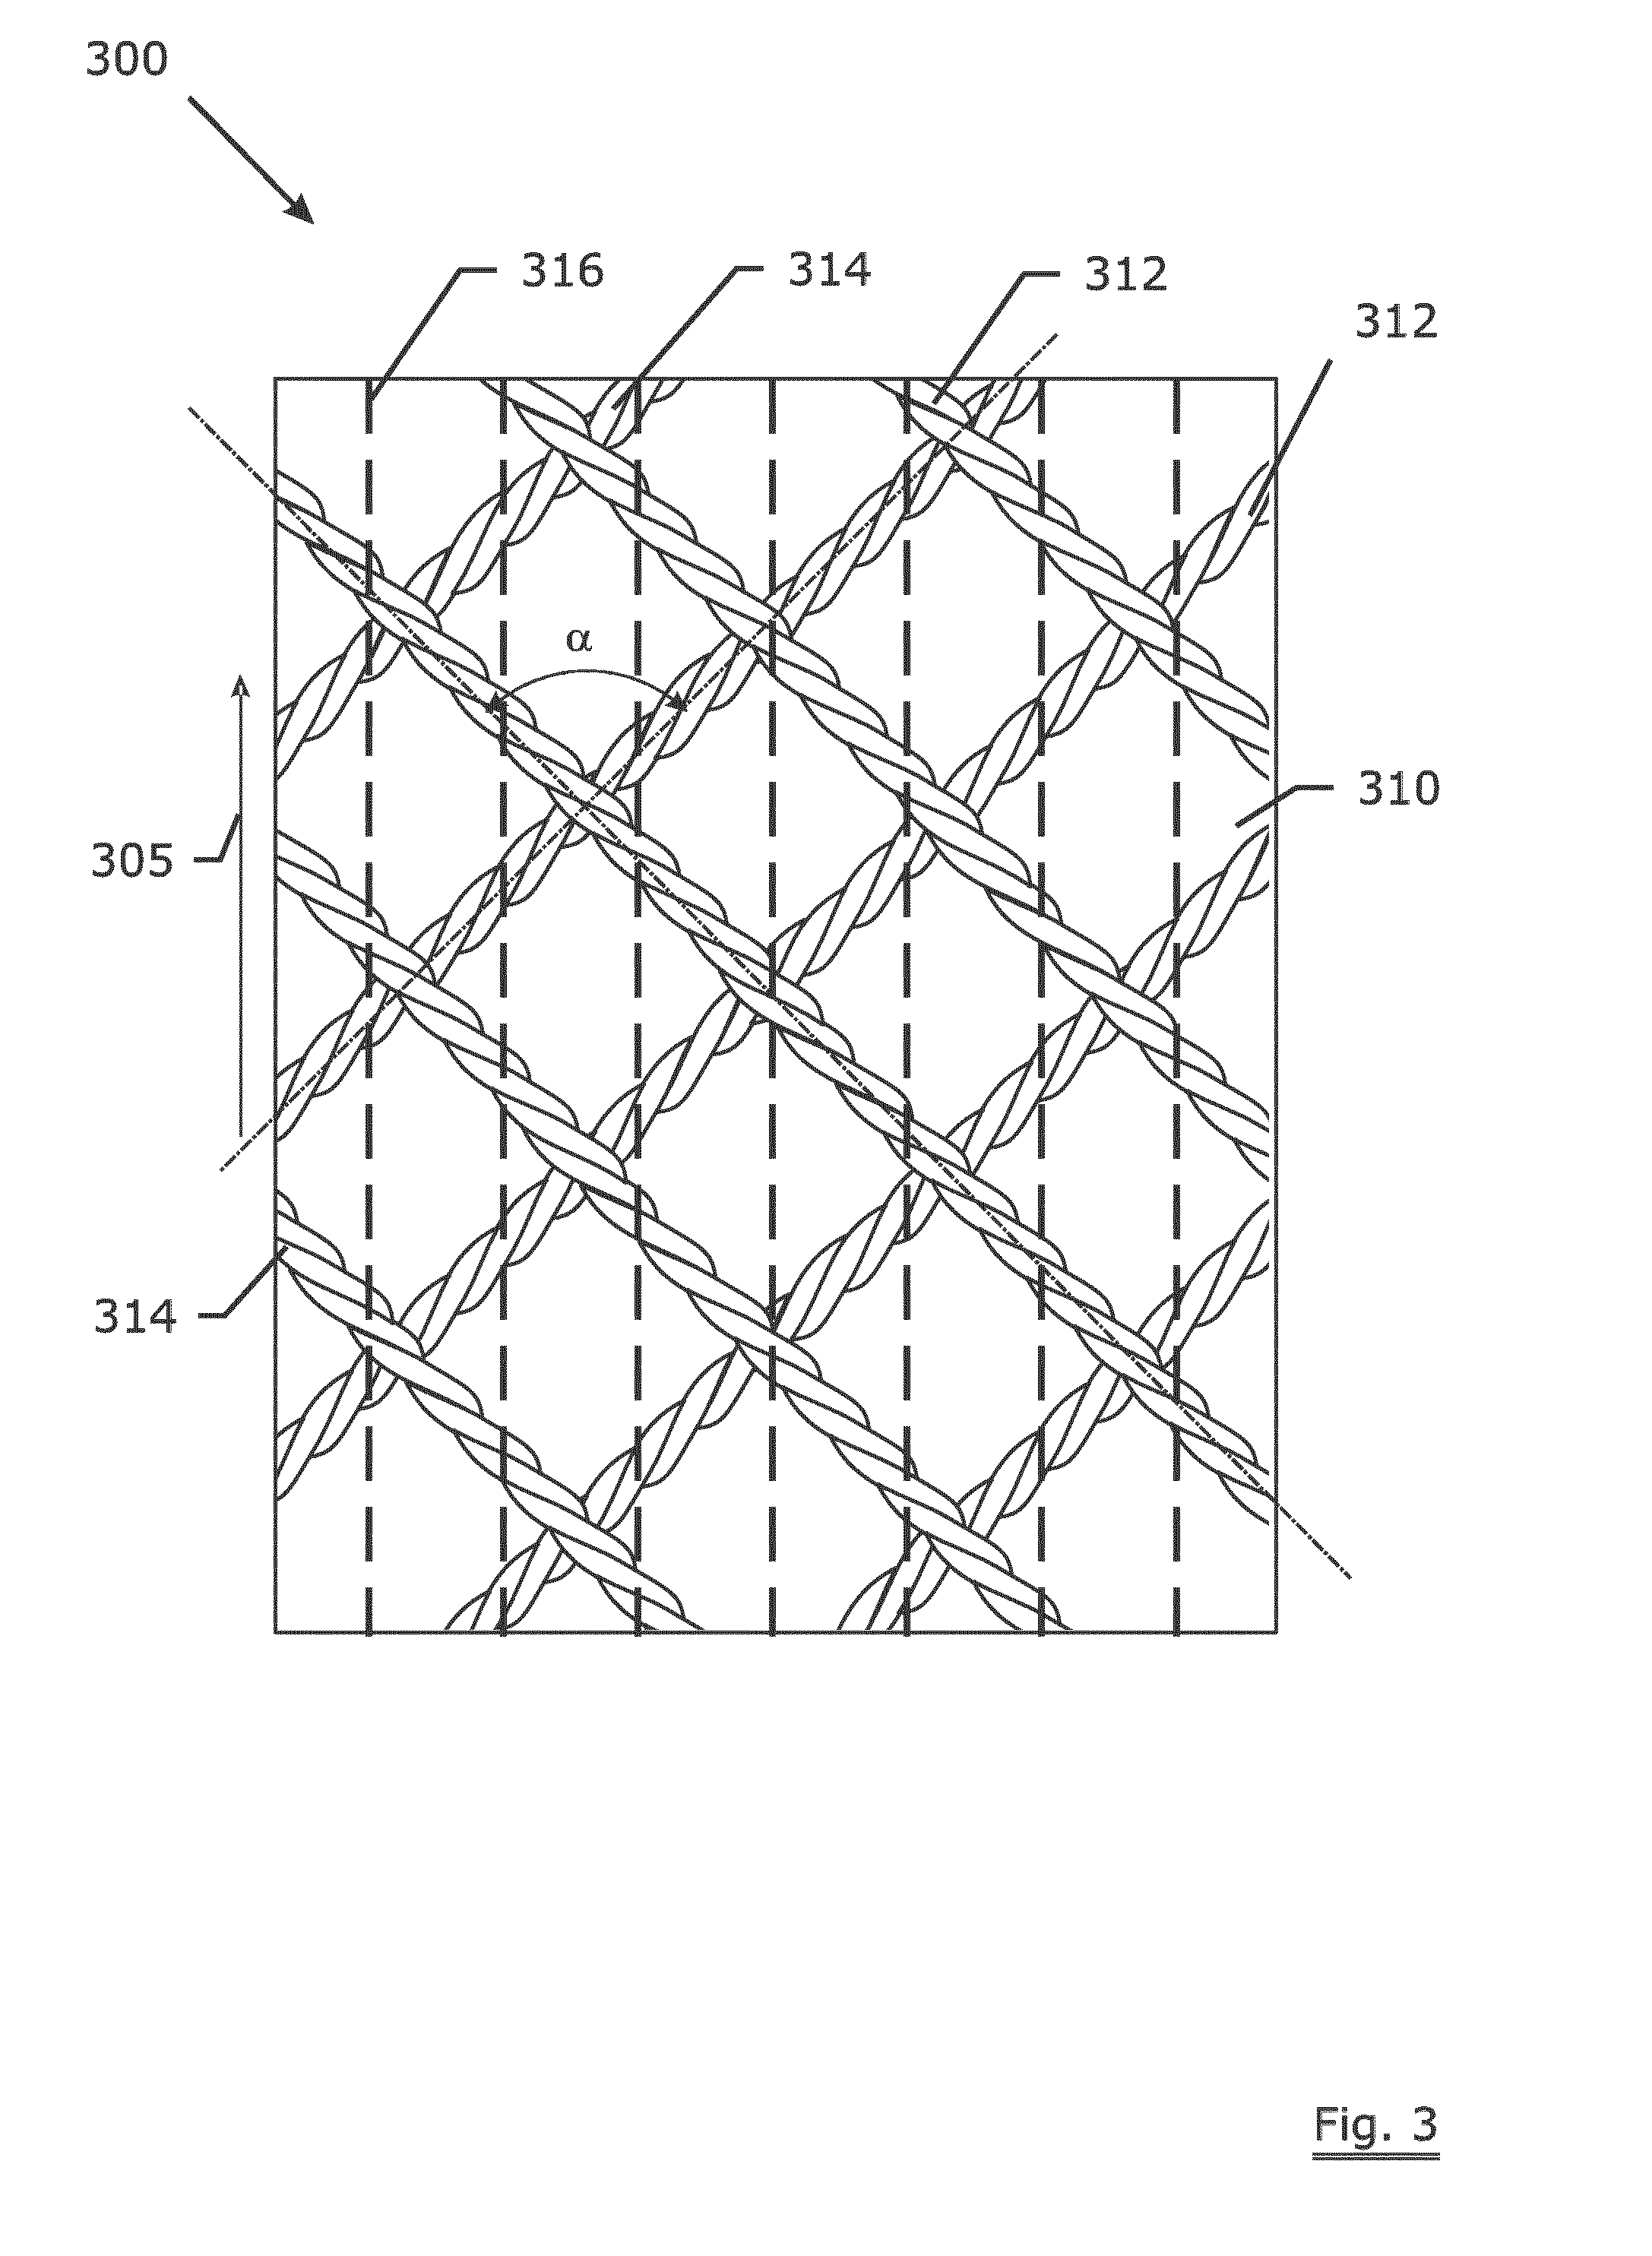 A structure for the reinforcement of pavements comprising assemblies of grouped metal filaments coupled to or integrated in a substrate